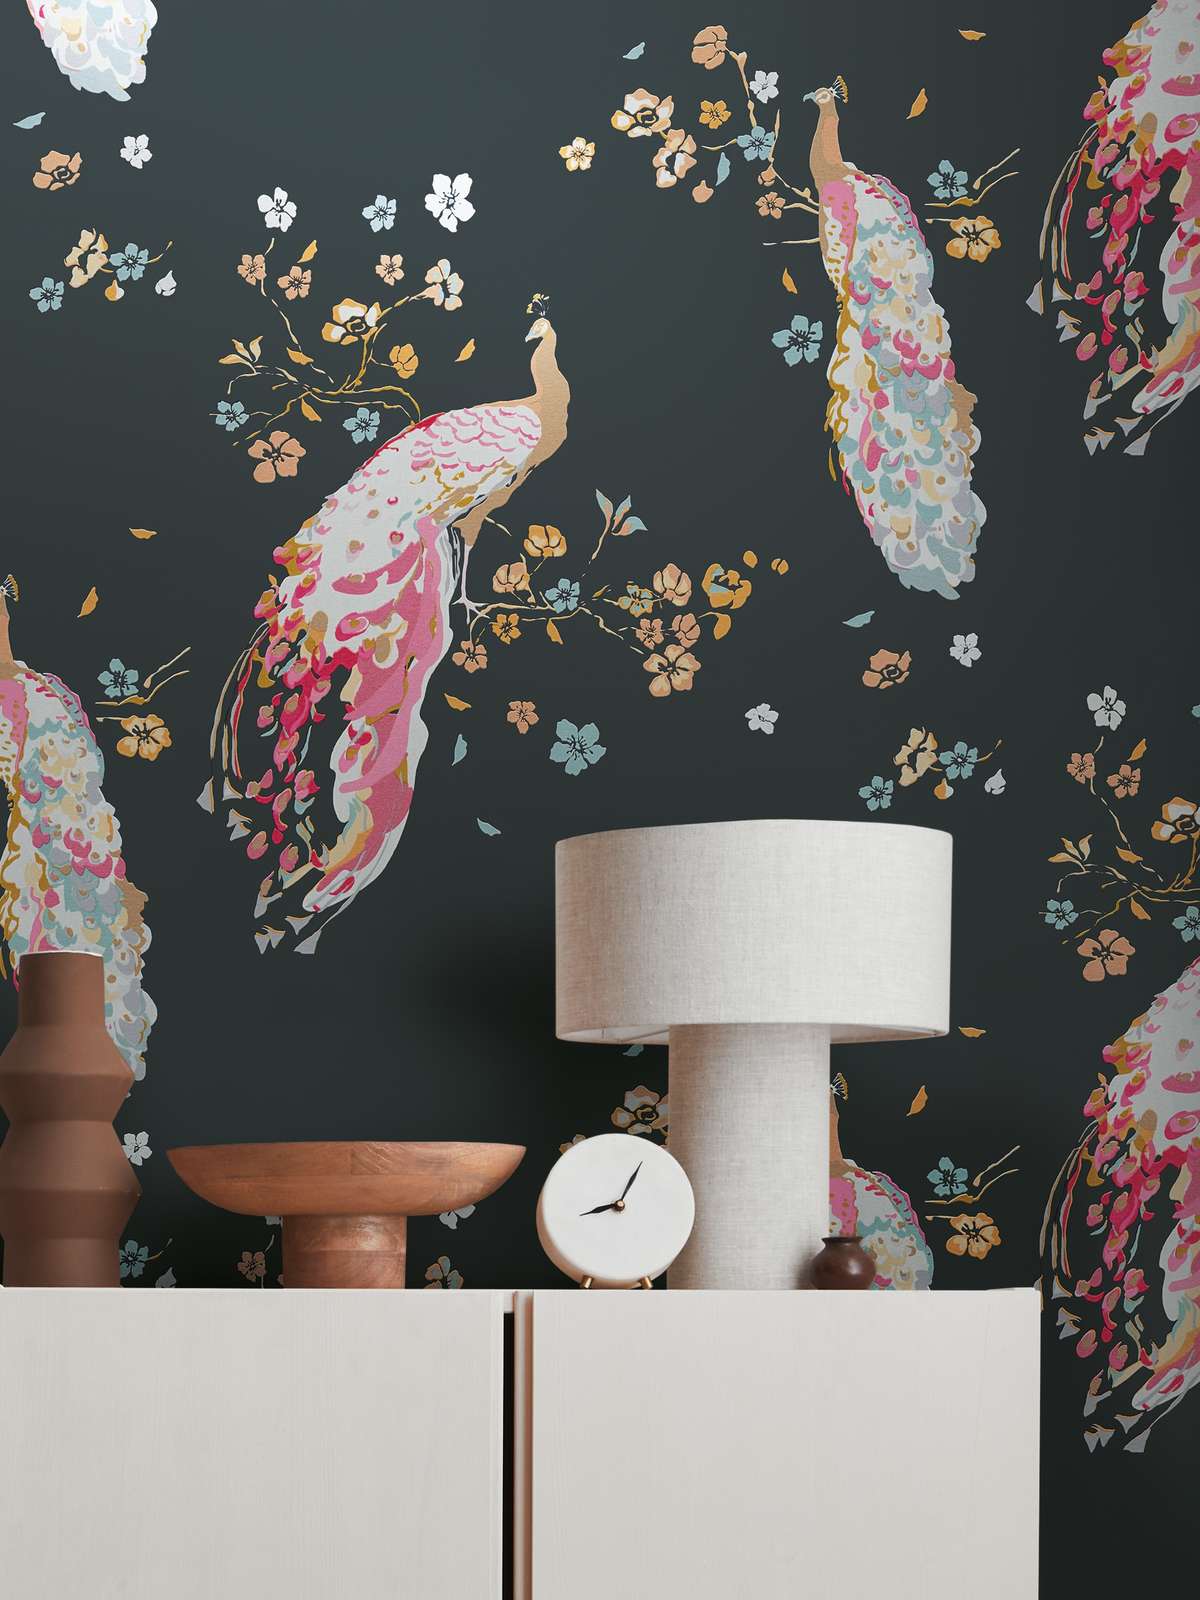             Non-woven wallpaper with peacock pattern with gloss & texture - black, gold, colourful
        